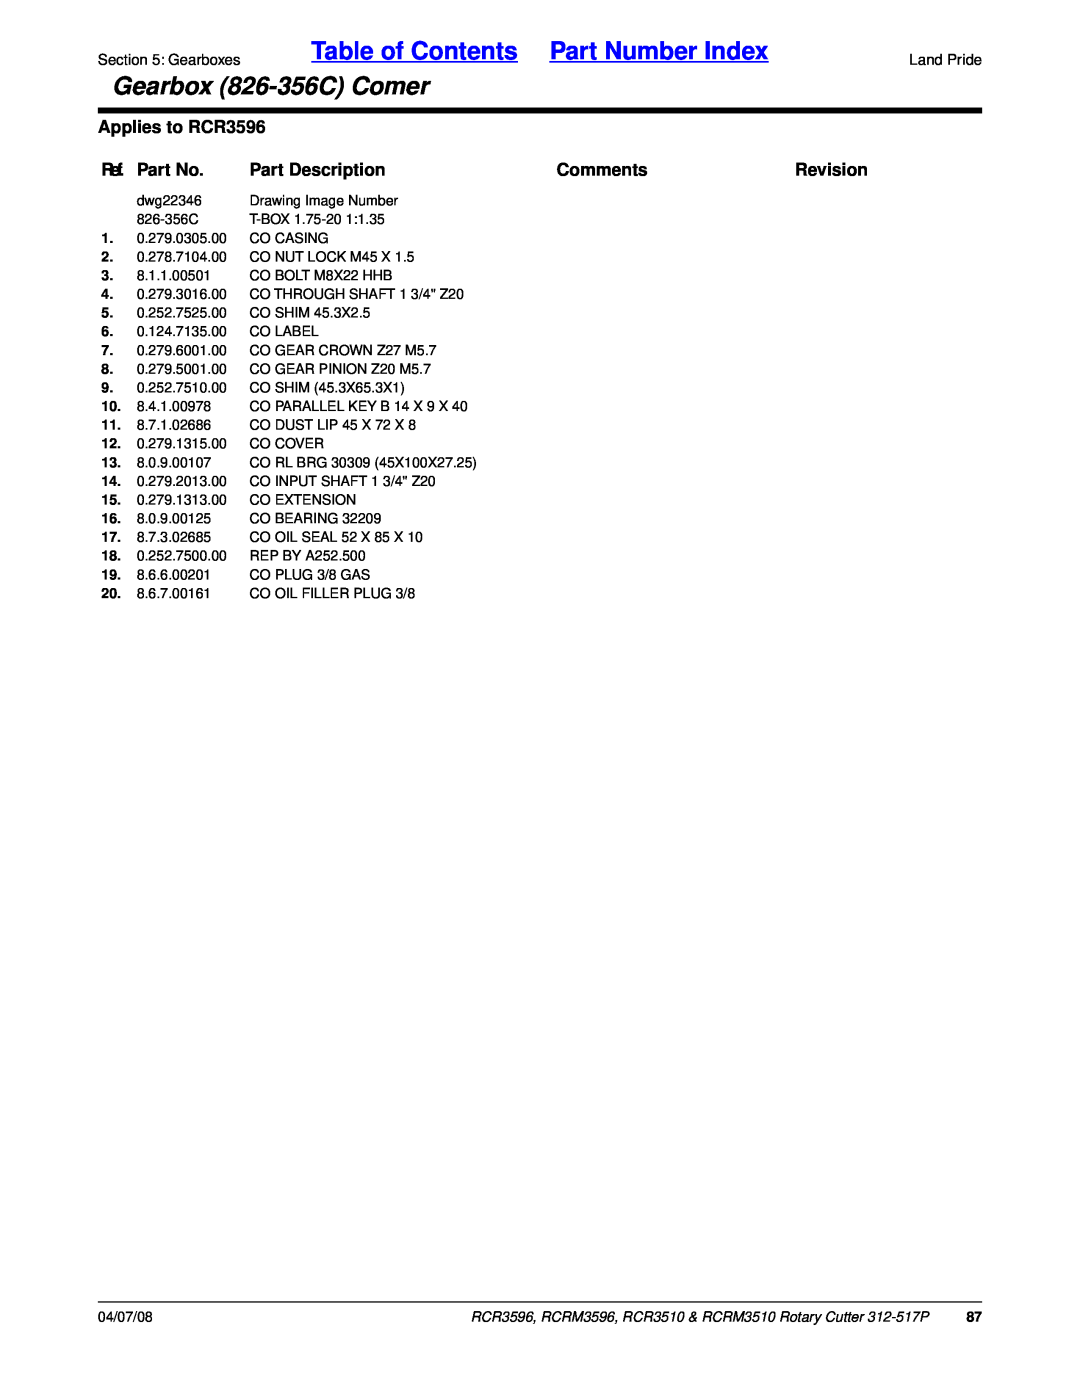 Land Pride manual Table of Contents Part Number Index, Gearbox 826-356CComer, Applies to RCR3596, Ref. Part No, Comments 